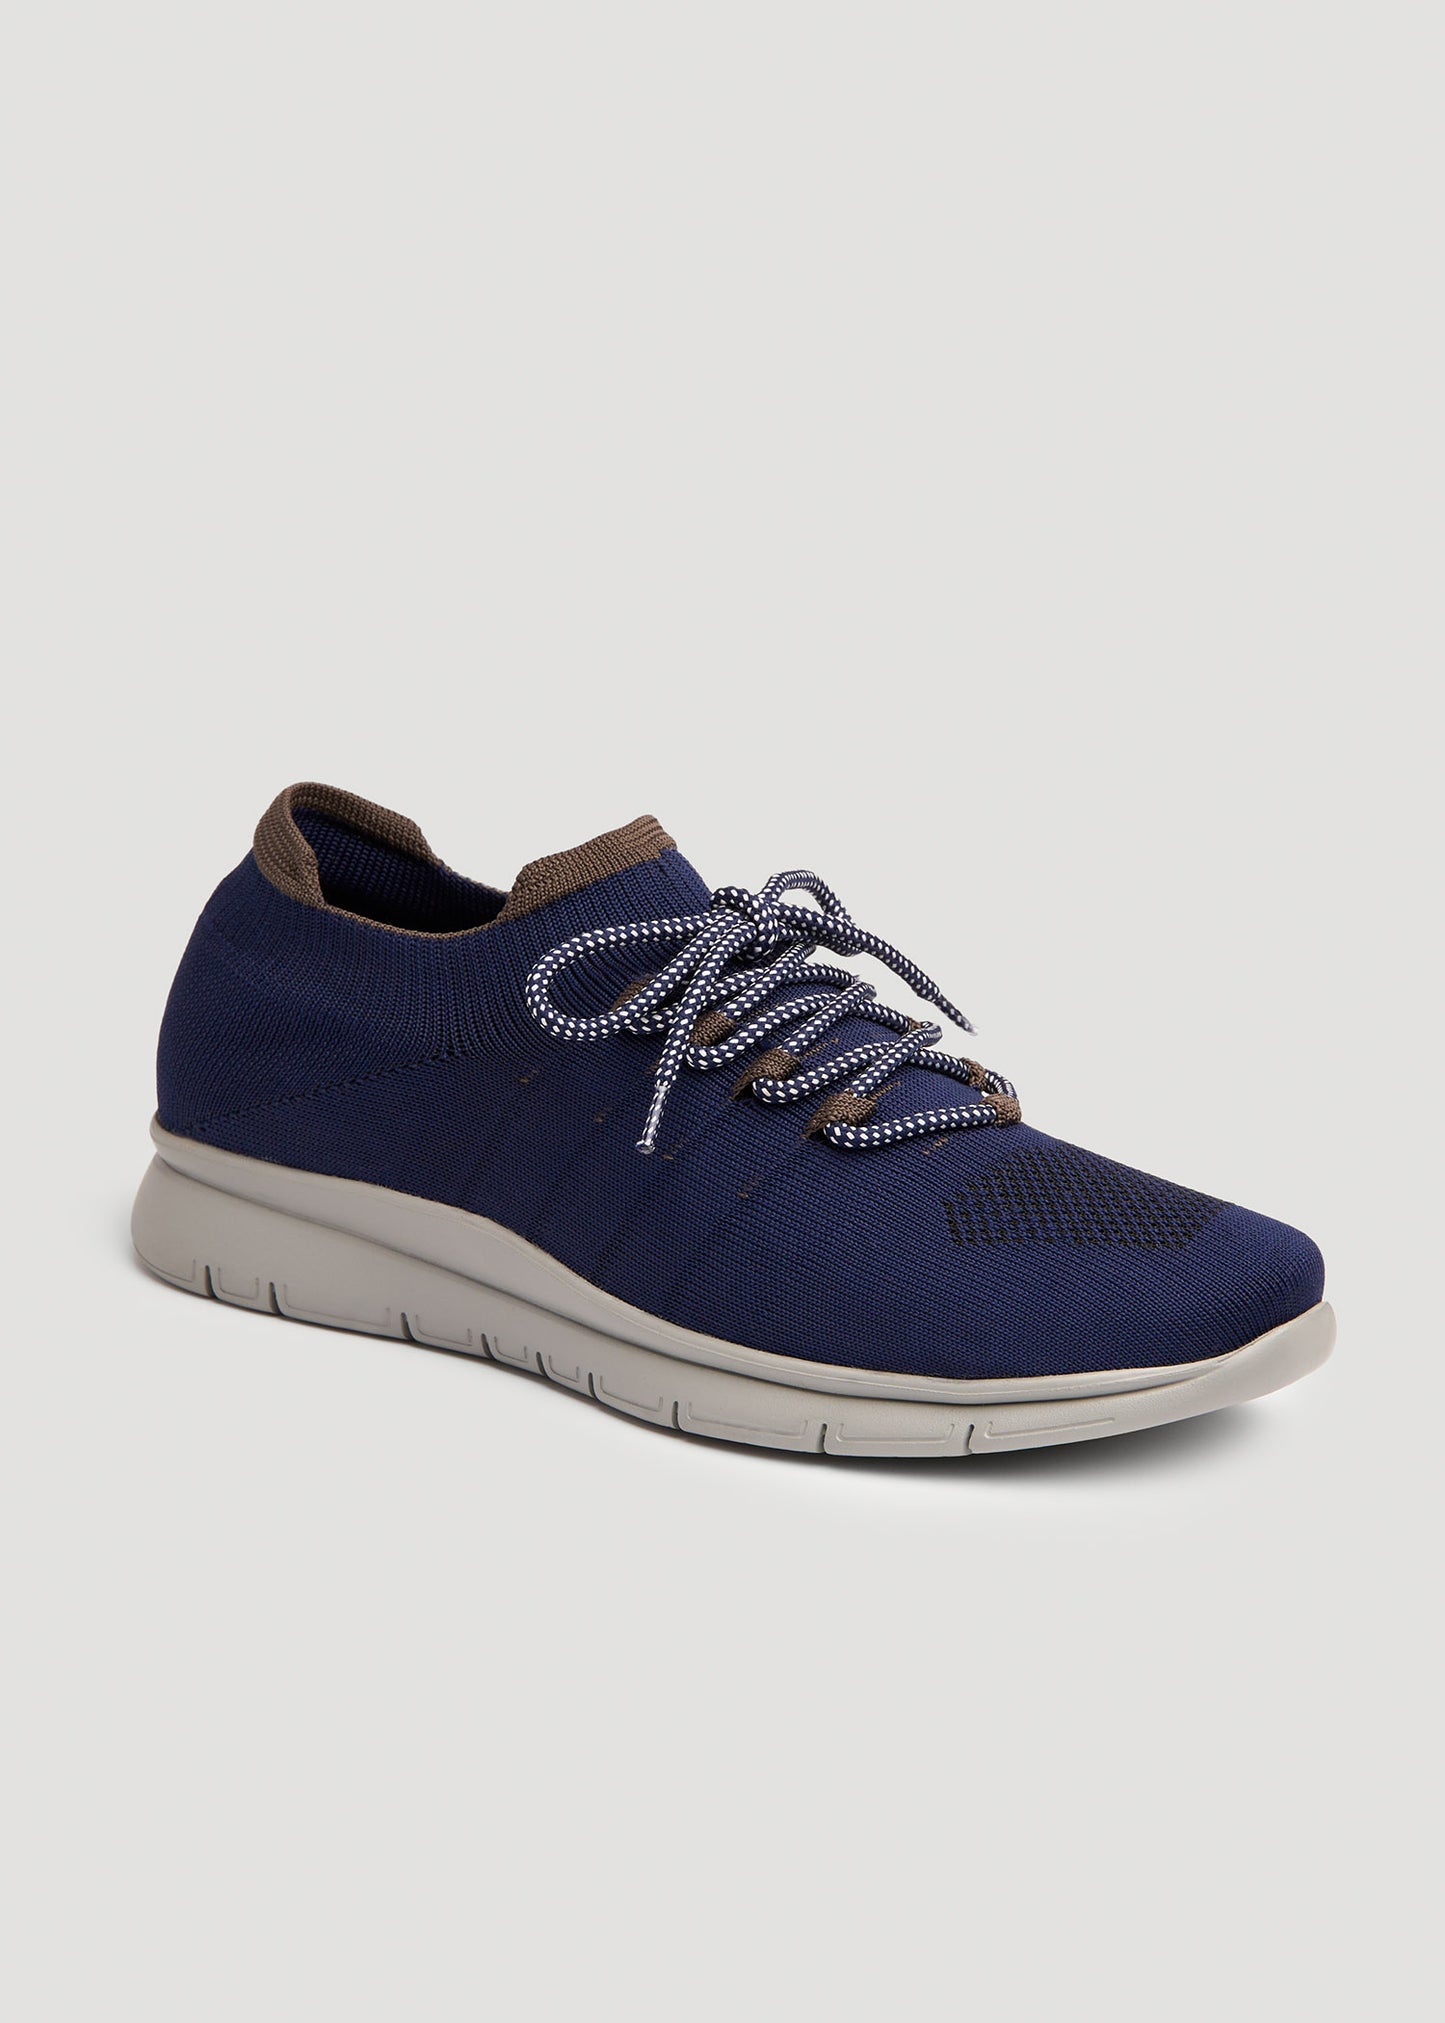 American-Tall-Men-Knit-Runners-Navy-Front